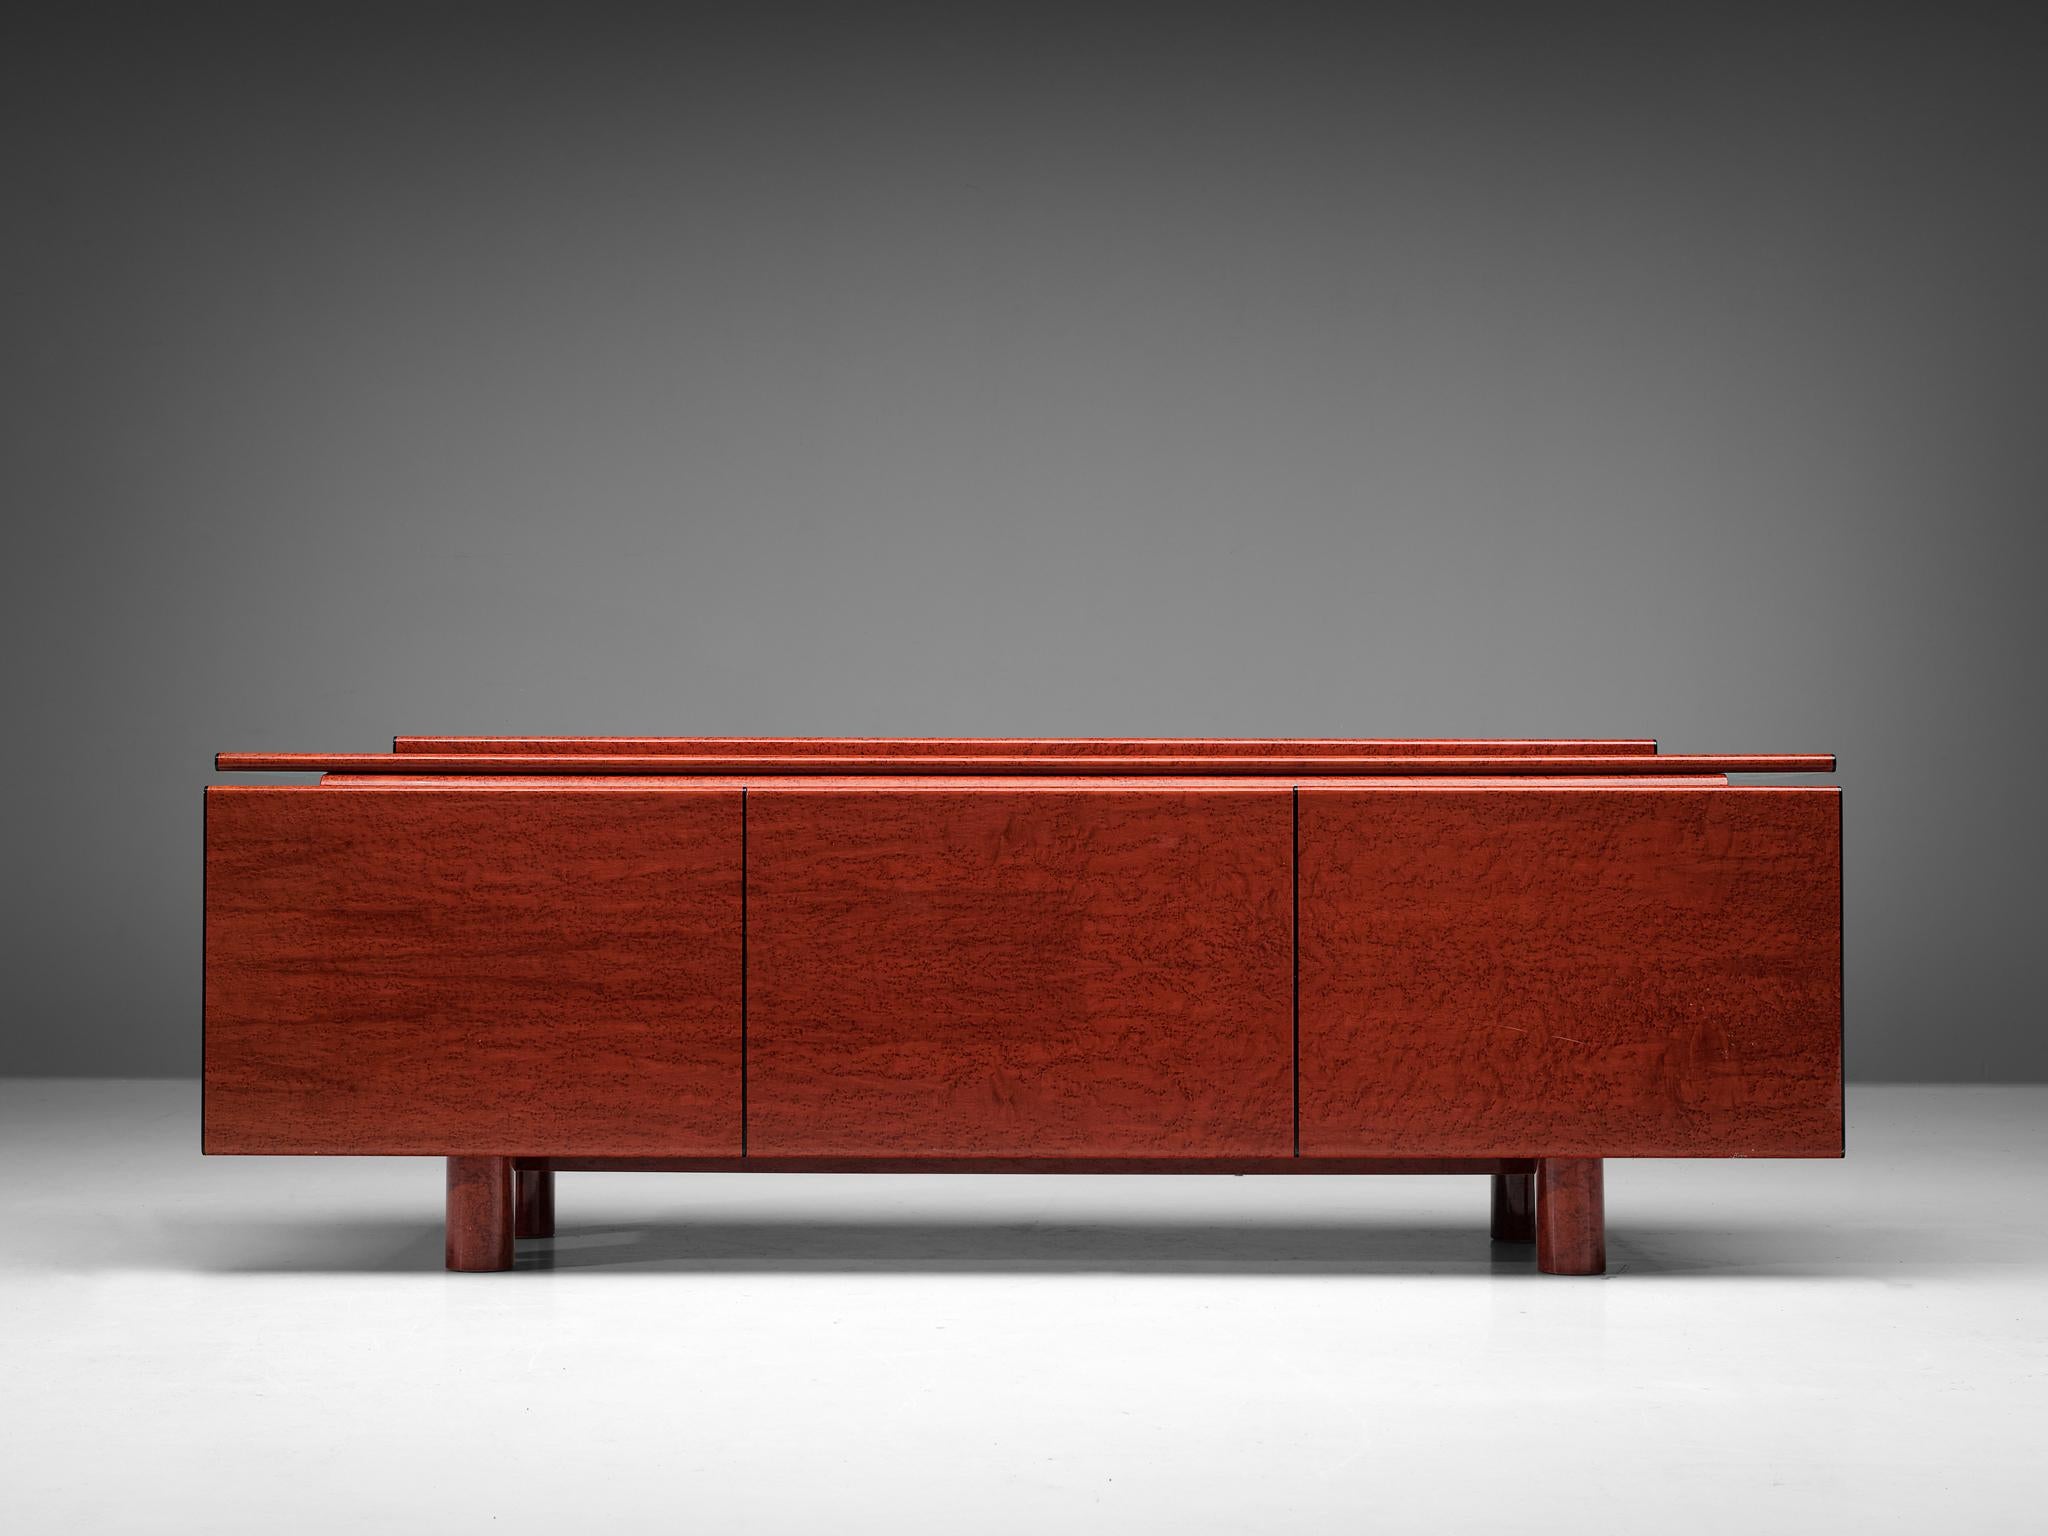 Carlo Marelli and Massimo Molteni for Guiseppe Borghi & Figli, sideboard, model 'Tula', red stained birdseye maple, glass, fine leather, Italy, 1980s

This eccentric sideboard has a strong artistic look and hits the border between art and furniture.